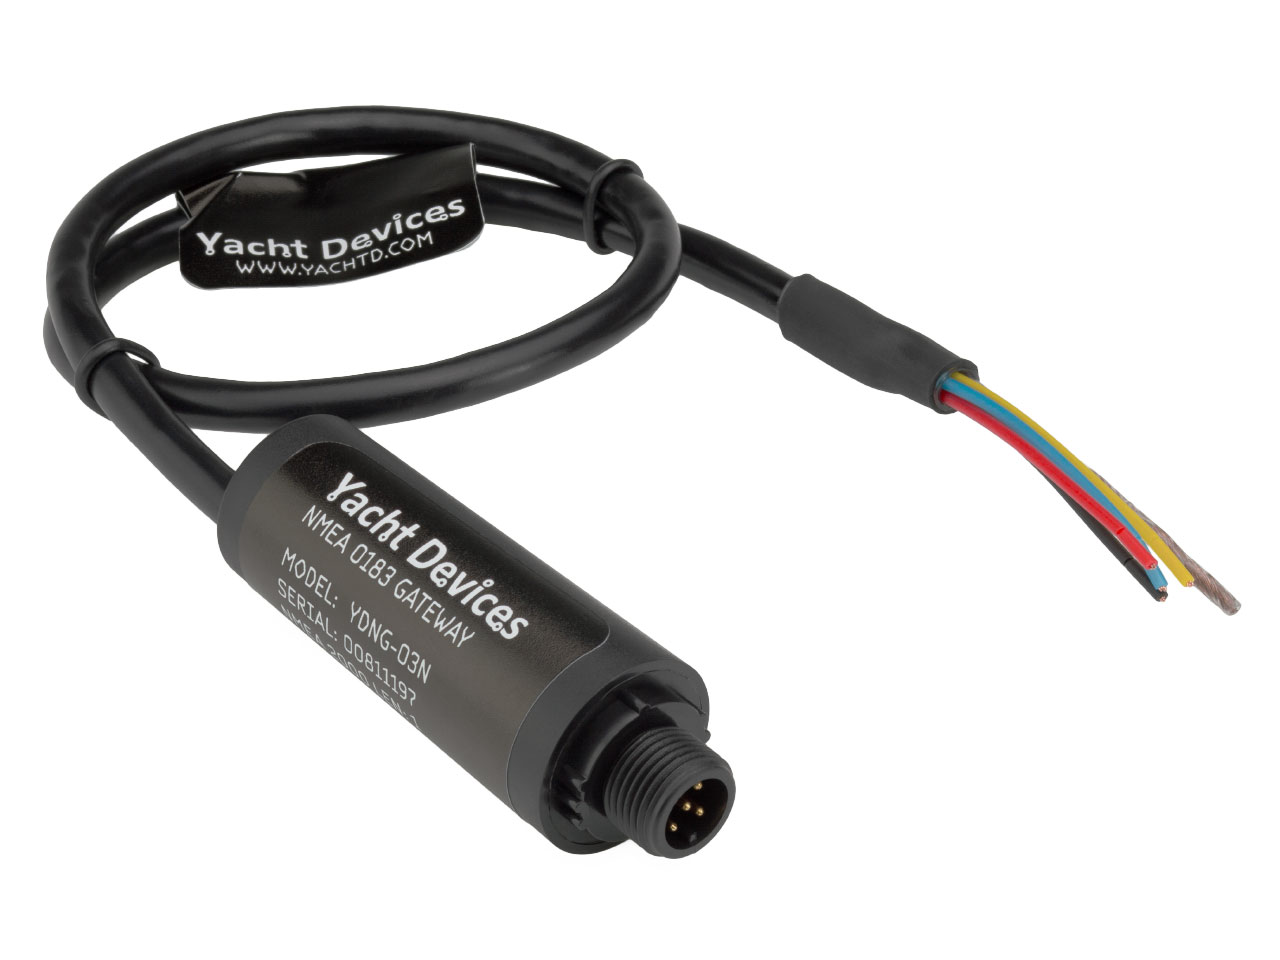 YDNG-03N model, with NMEA 2000 Micro Male connector